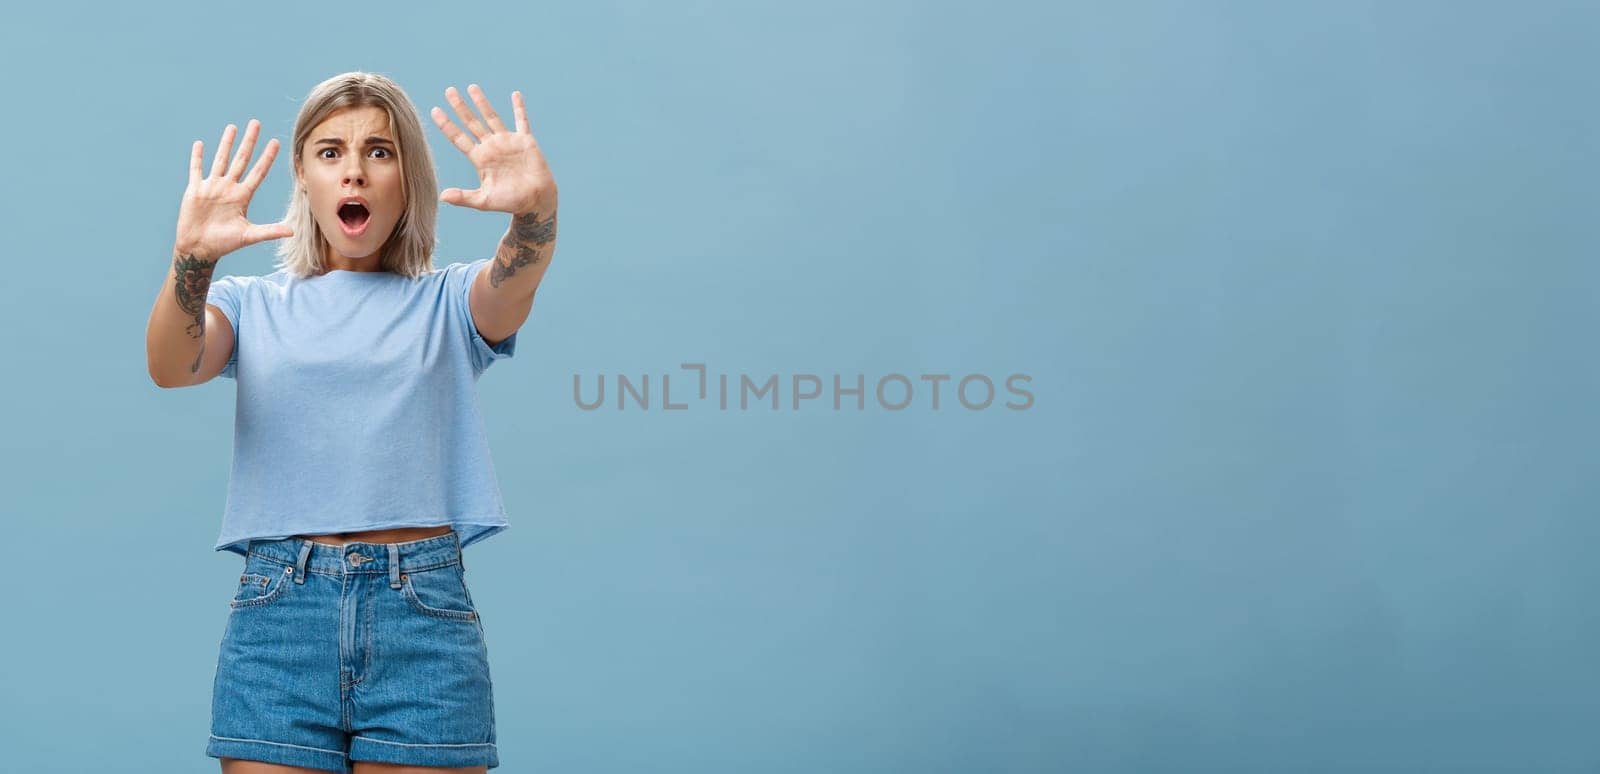 Woman terrified screaming and asking stop. Portrait of shocked panicking troubled blonde female in denim shorts and casual t-shirt pulling hands in no gesture dropping jaw and frowning. Copy space